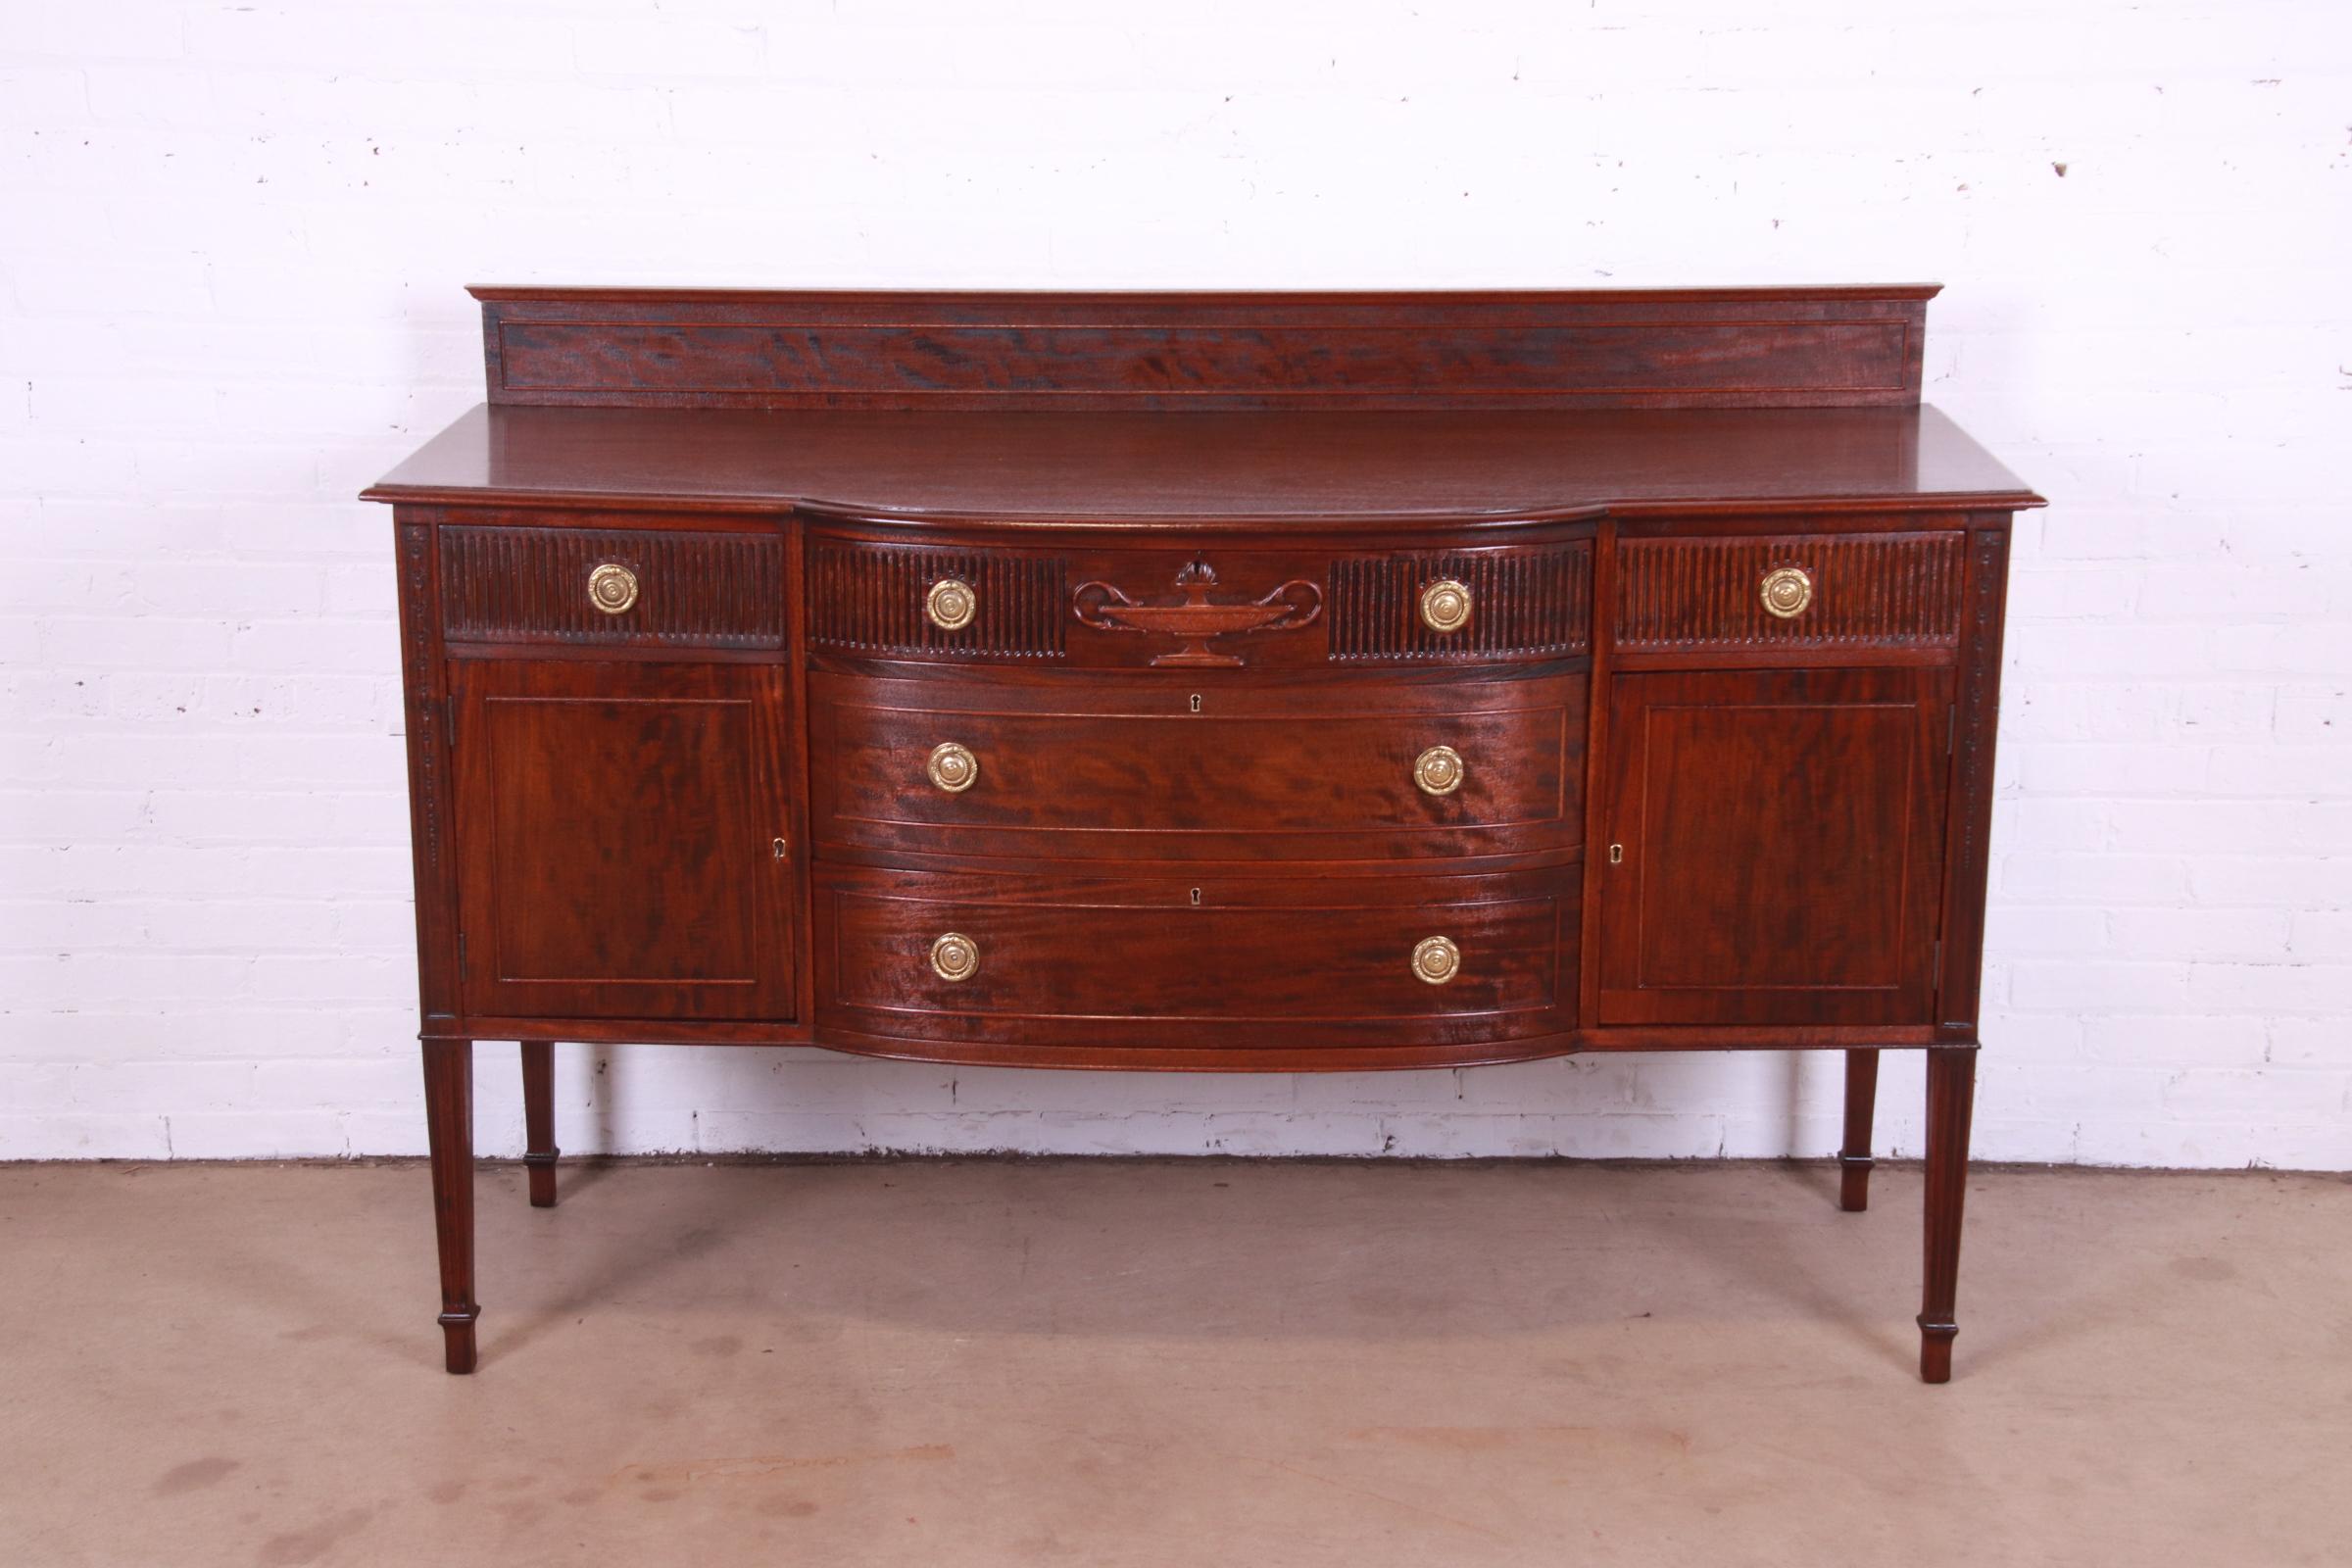 A gorgeous antique French Regency Louis XVI style bow front sideboard, buffet, or bar cabinet

In the manner of John Widdicomb

USA, Circa 1920s

Carved mahogany, with original brass hardware. Cabinets lock, and key is included.

Measures: